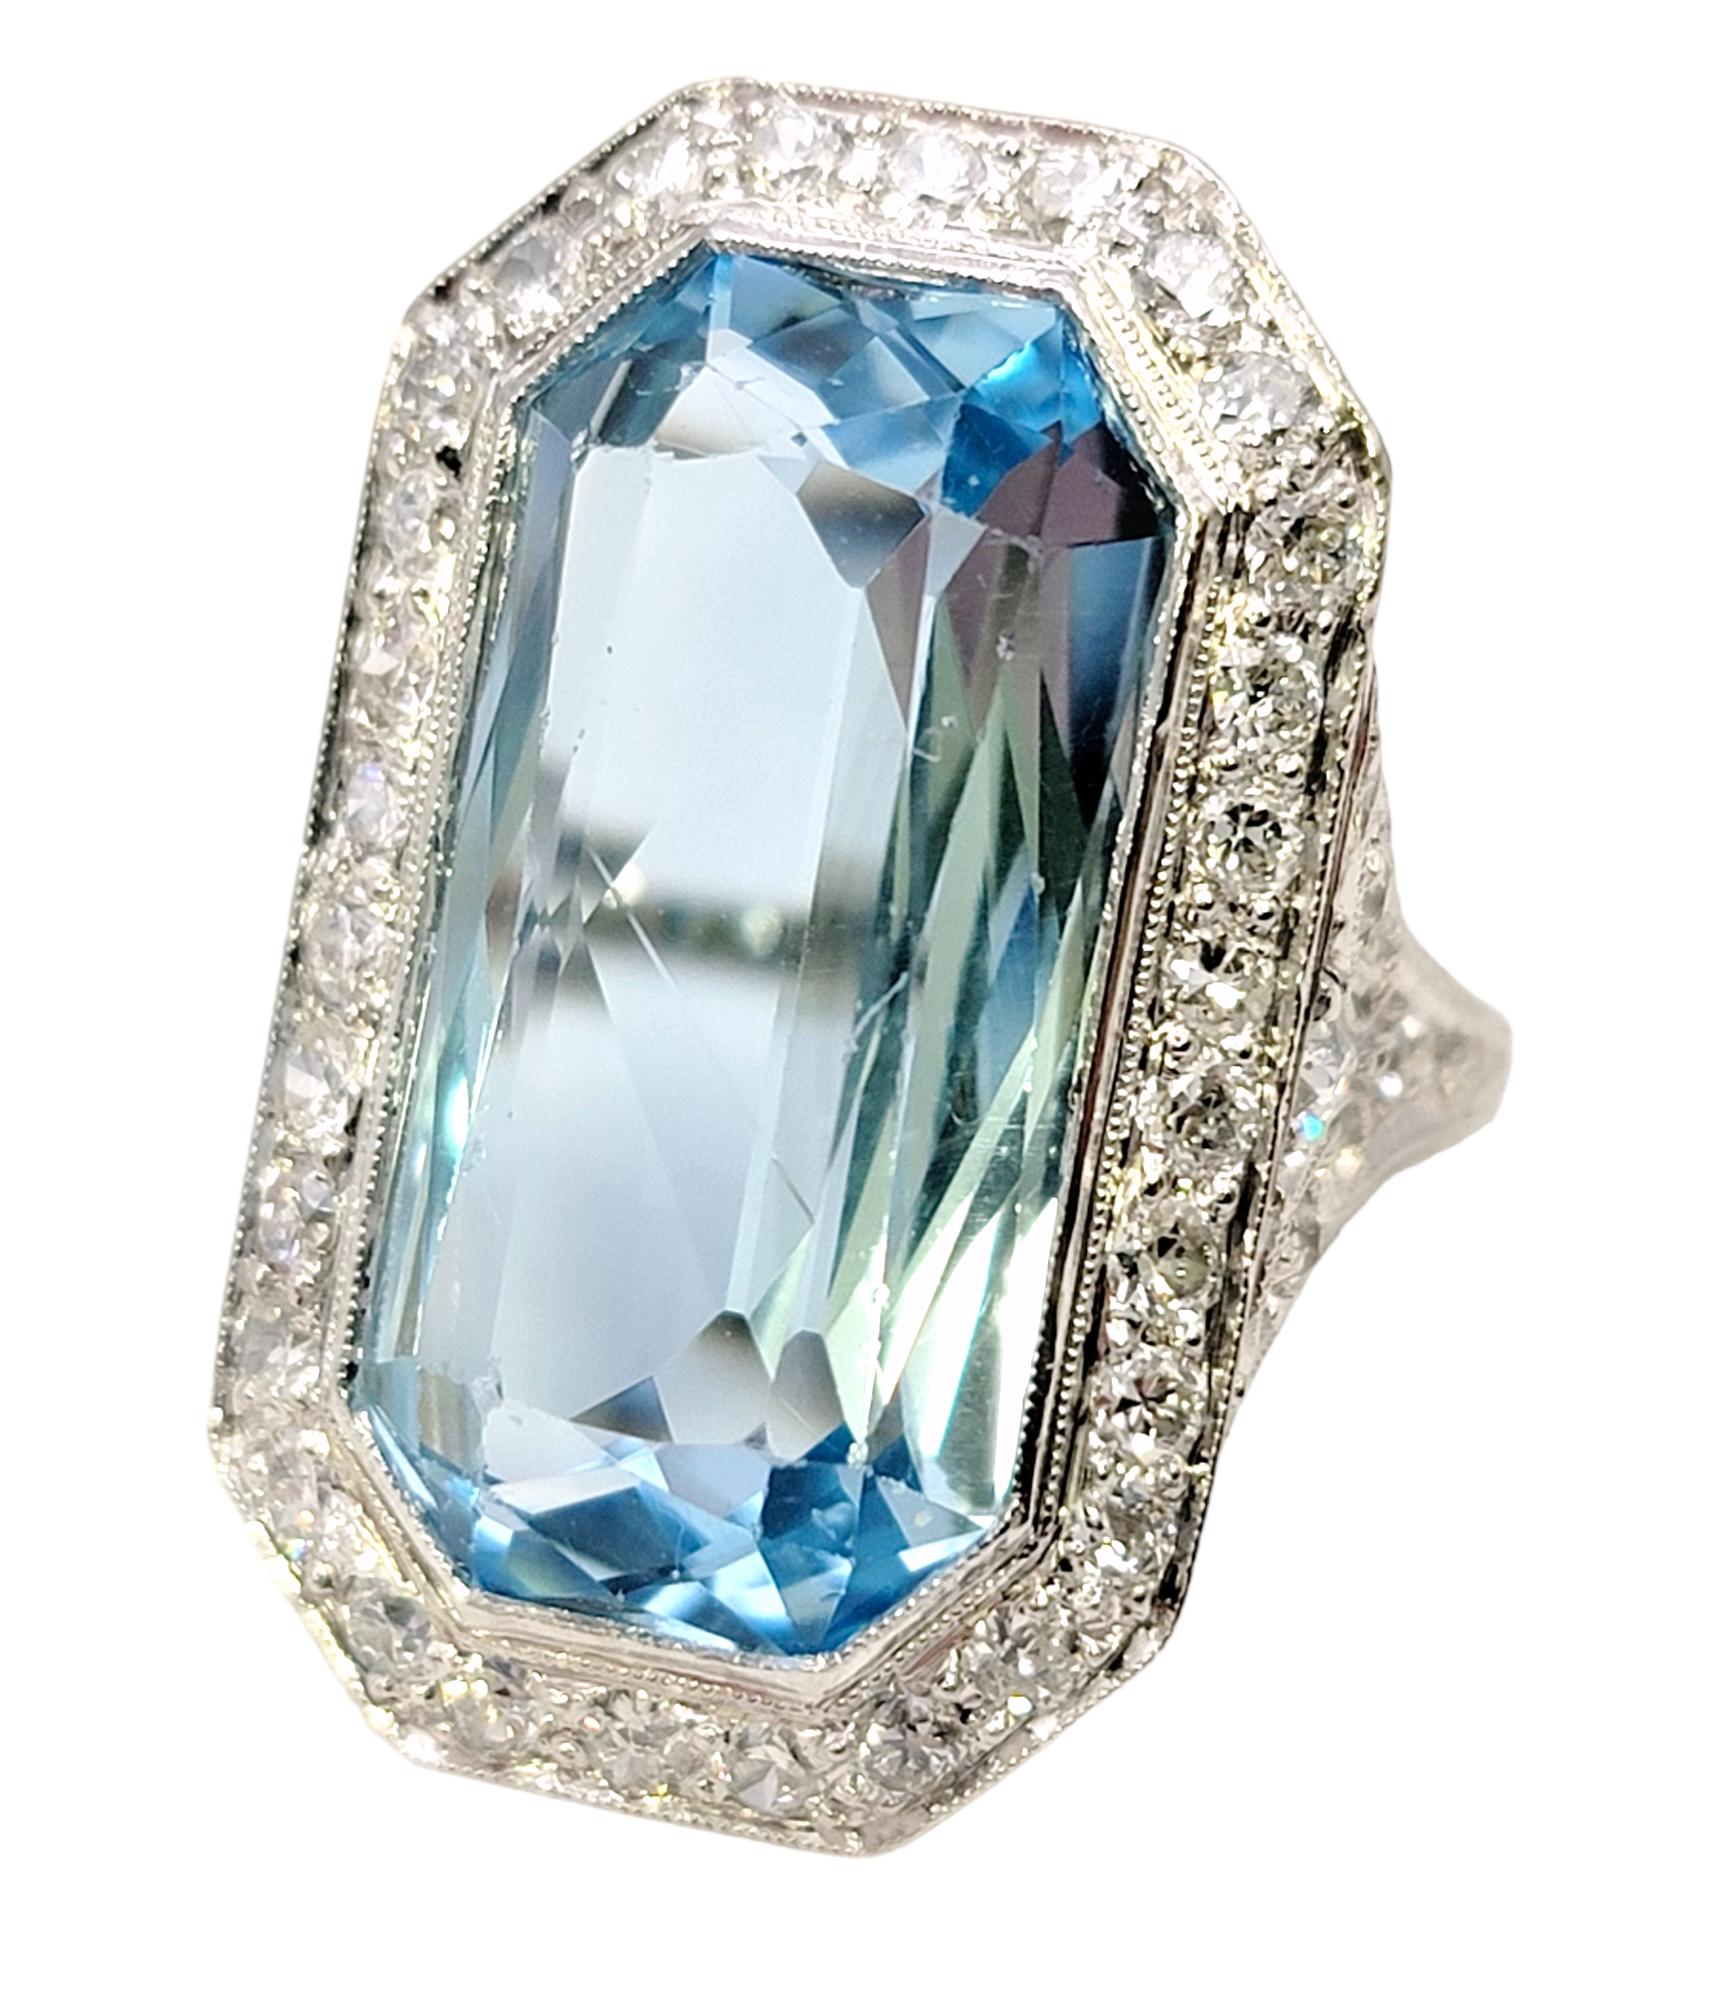 Ring size: 5

This exquisite vintage aquamarine and diamond cocktail ring is an absolute treasure. The dreamy light blue stone radiates on the finger while the glittering diamonds shimmer throughout, making the entire piece glow. 

This marvelous